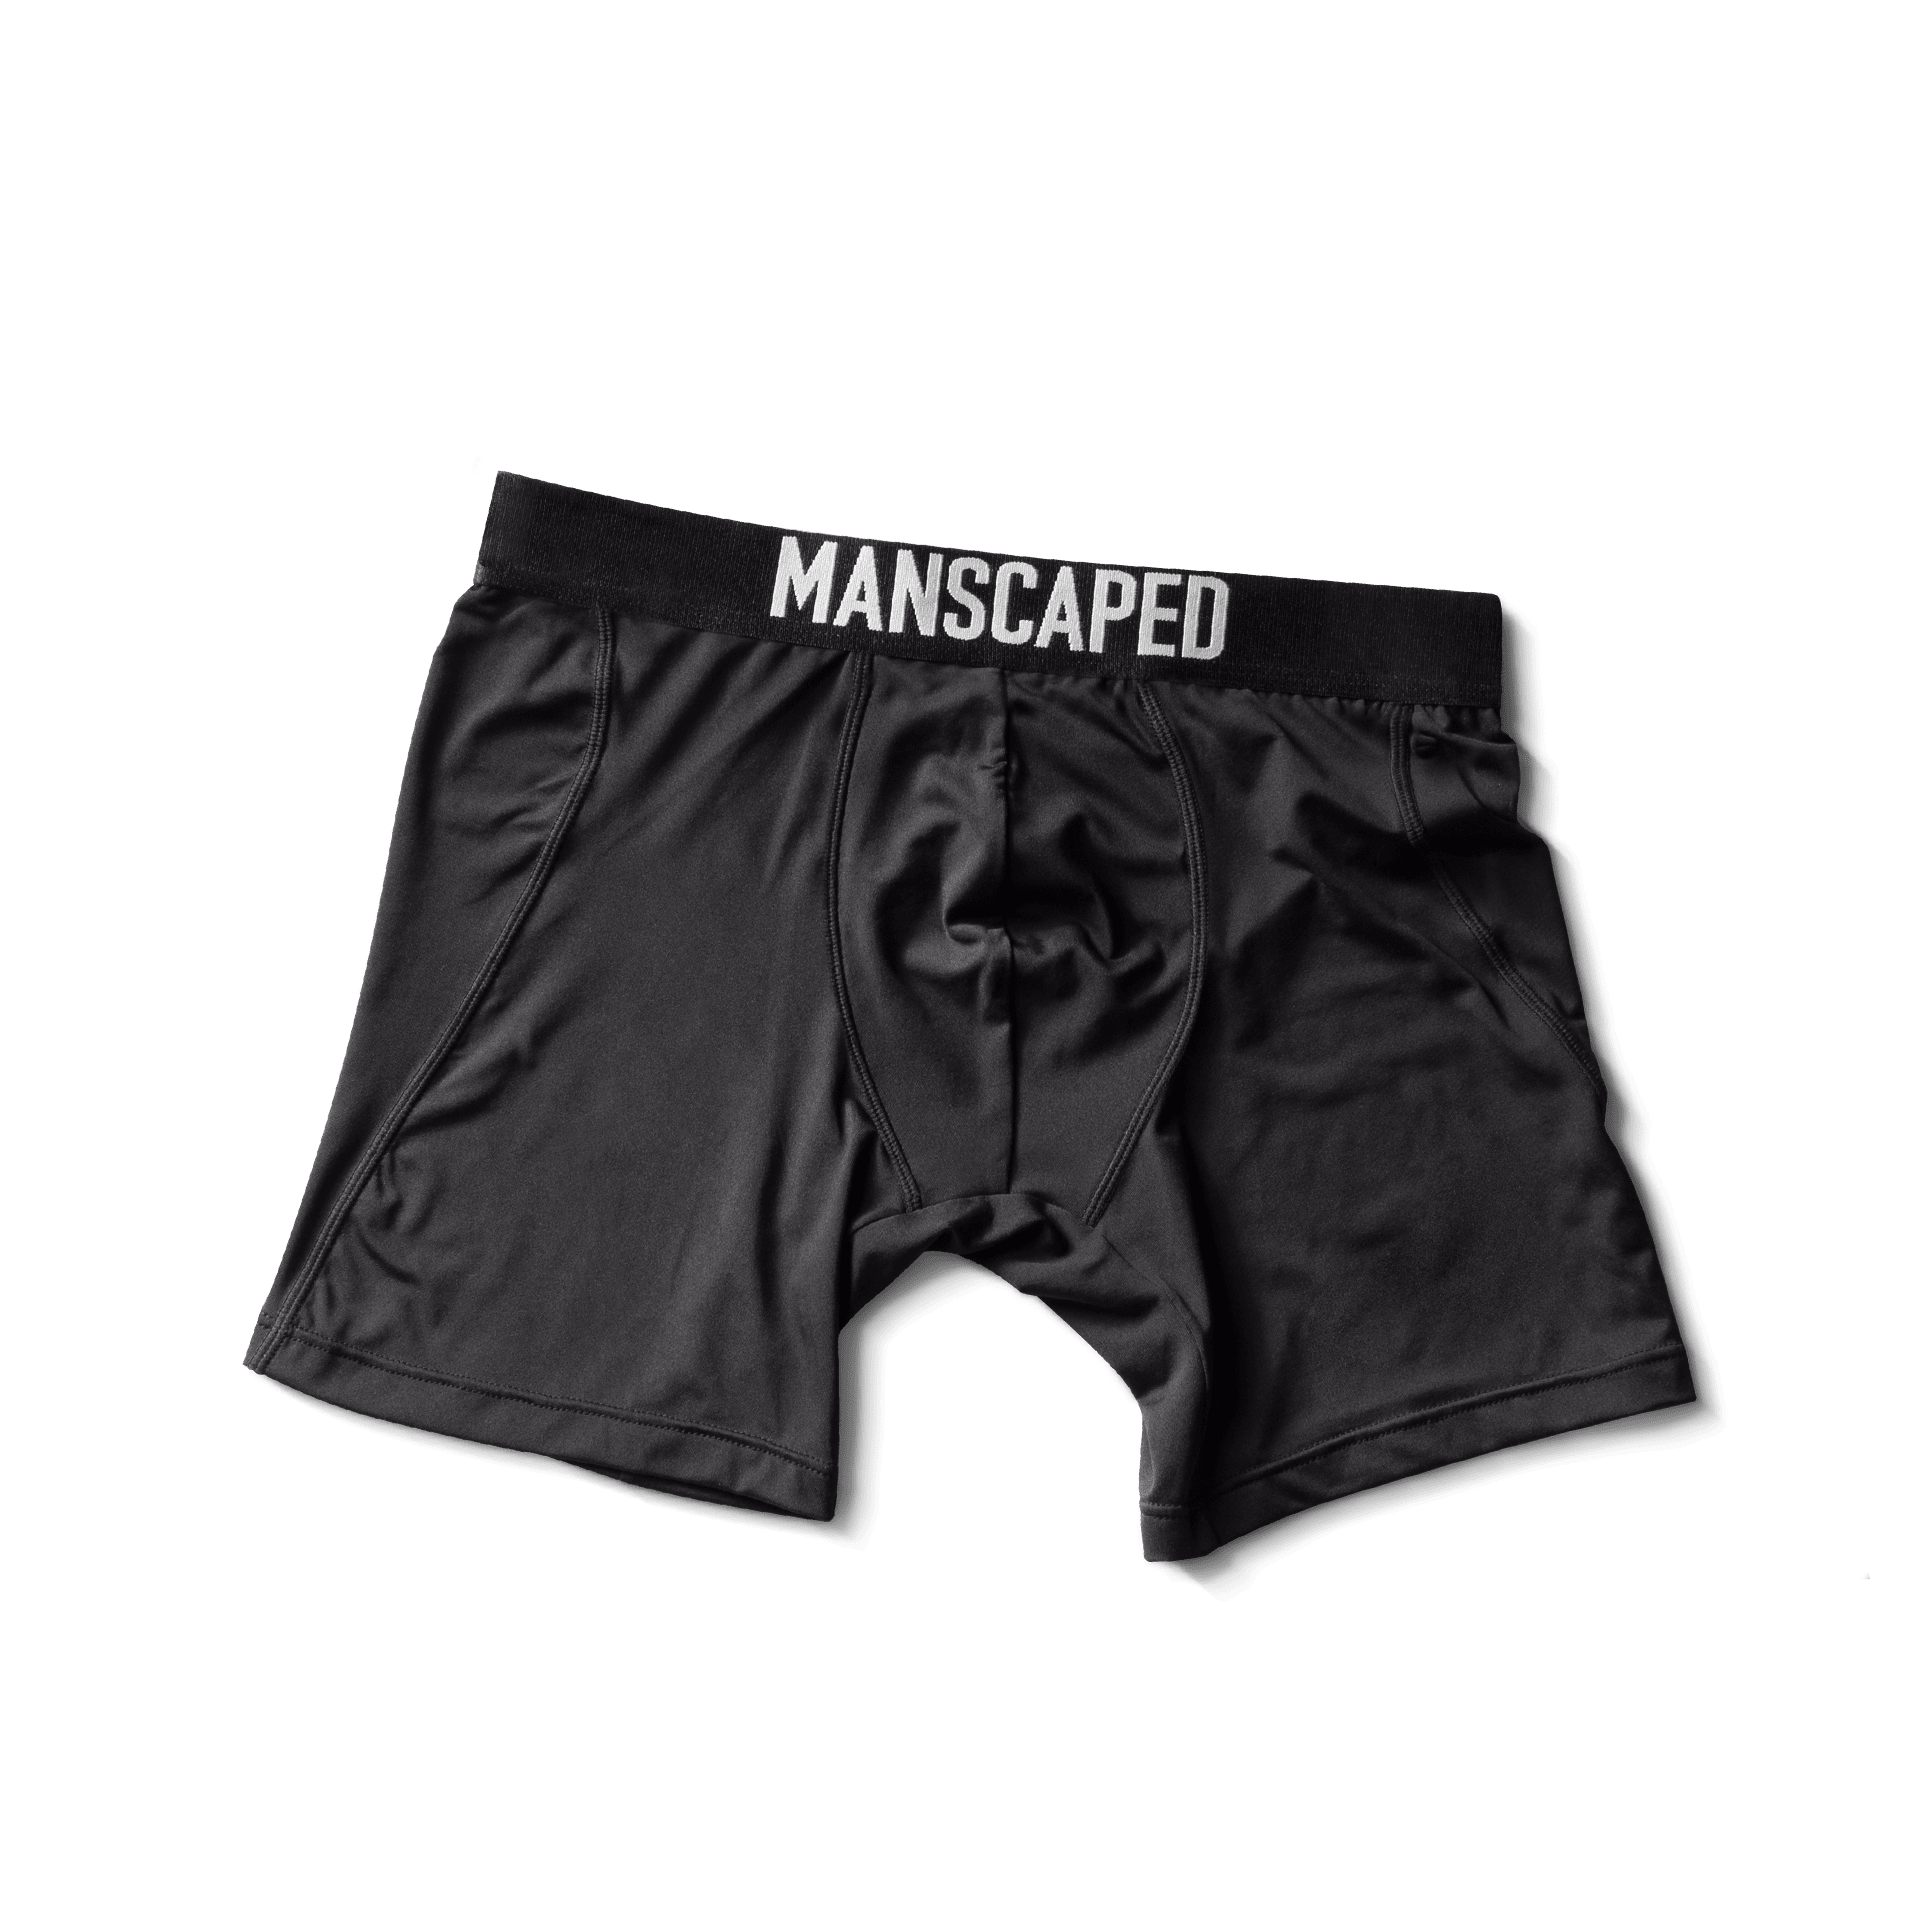 Manscaped Boxers 2.0 :: Behance